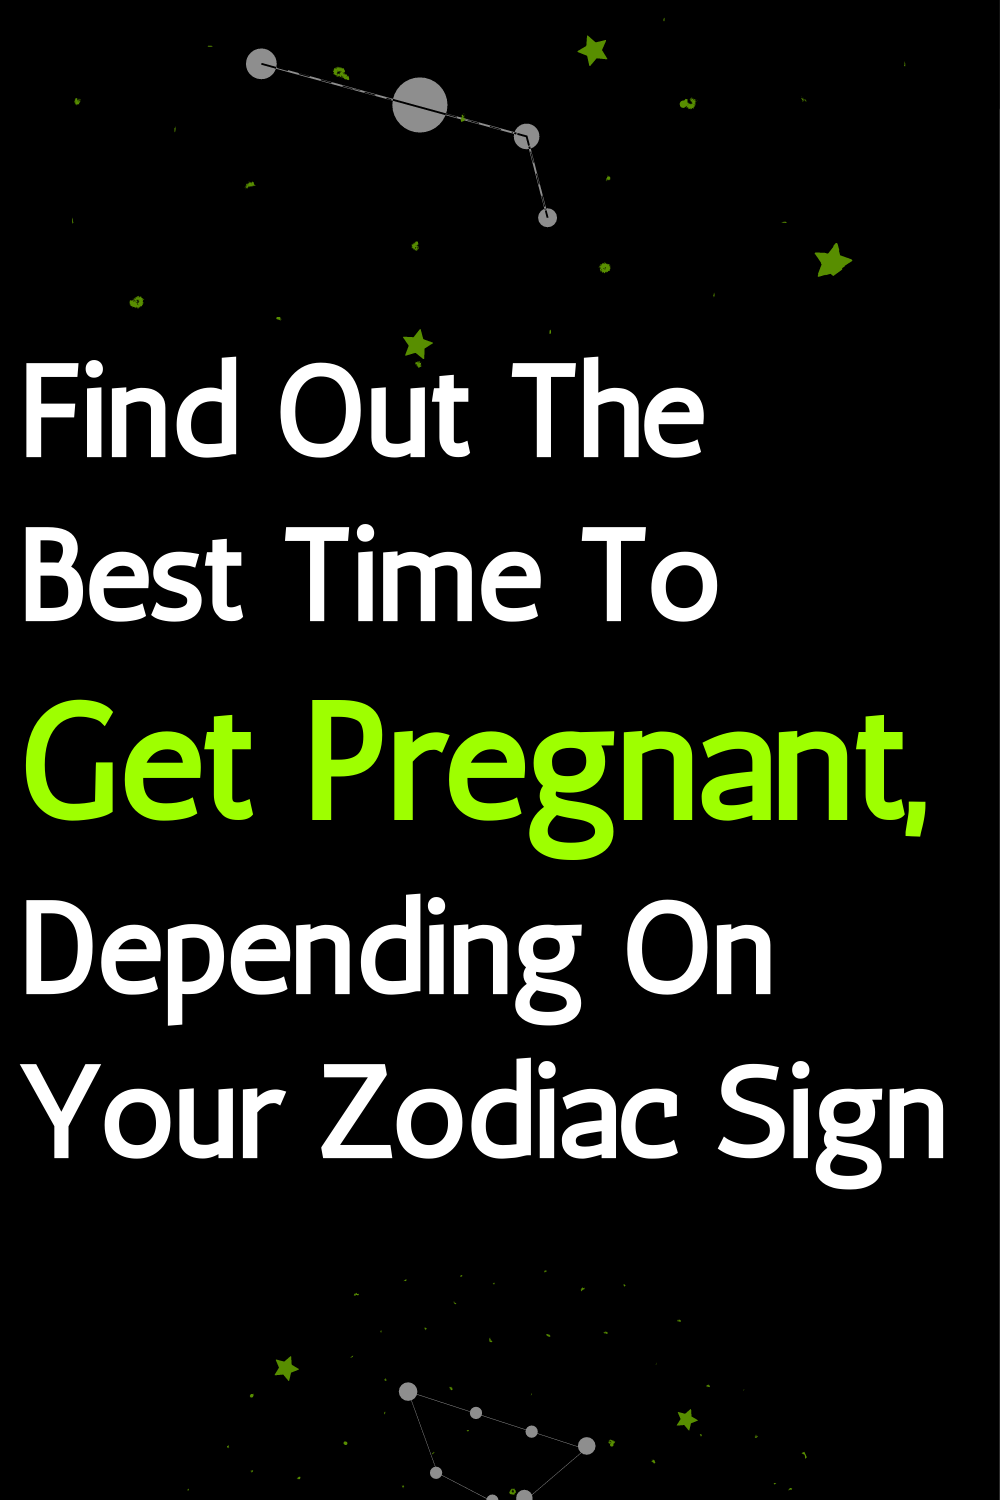 Find Out The Best Time To Get Pregnant, Depending On Your Zodiac Sign